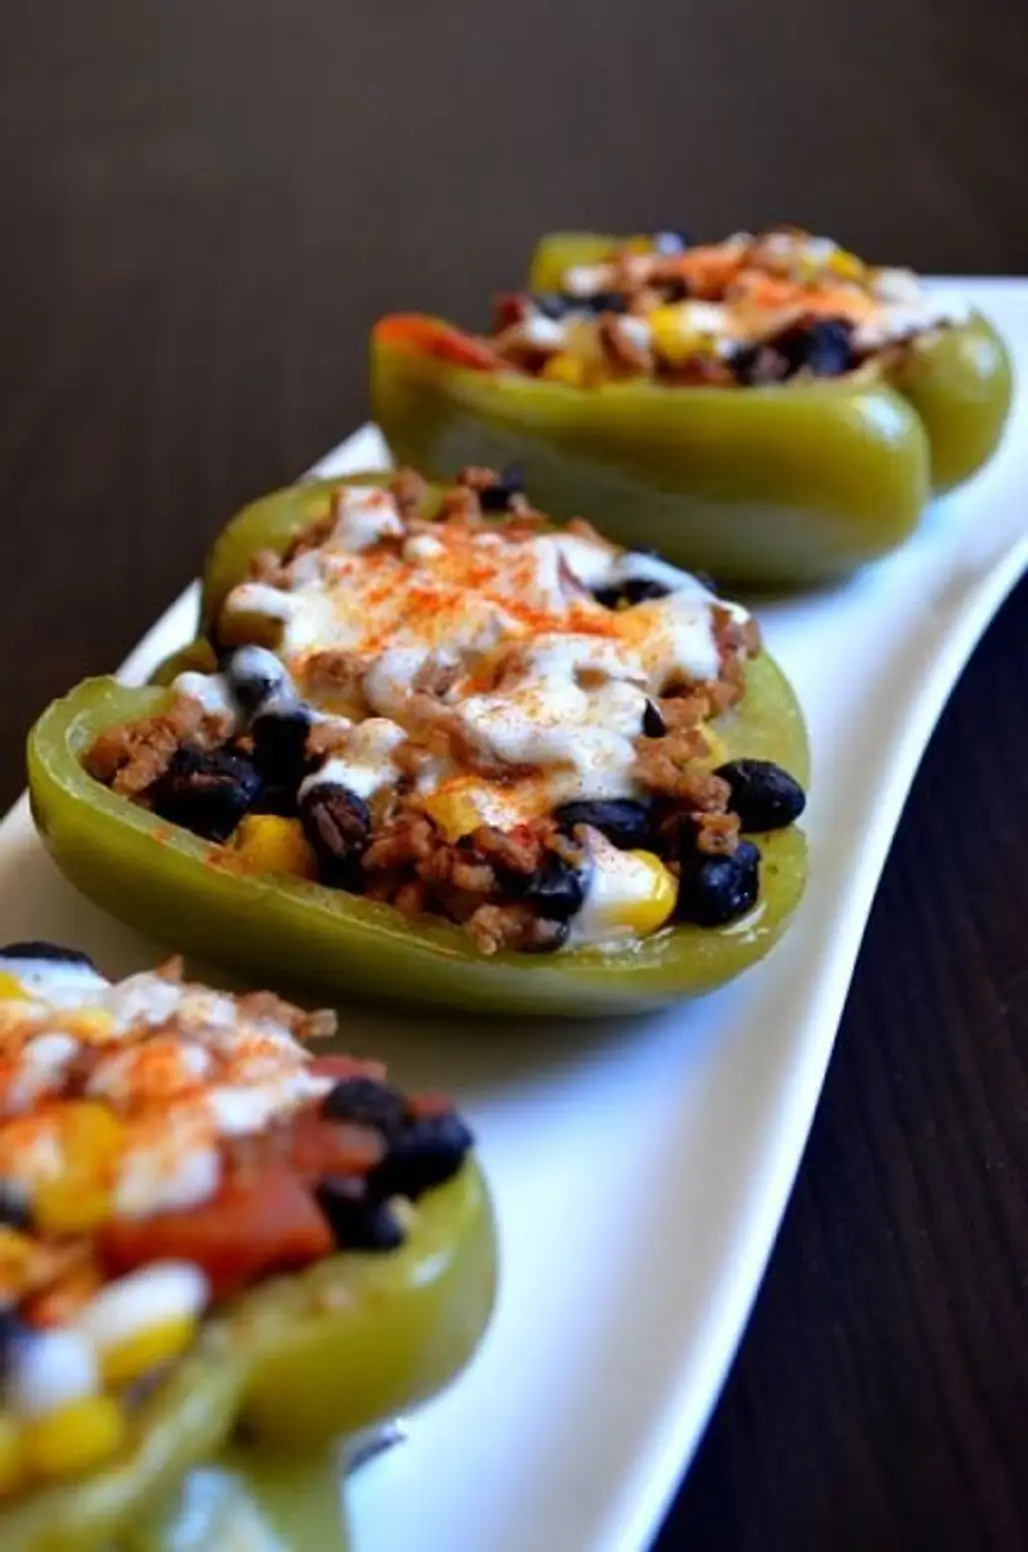 District of Columbia: Stuffed Peppers